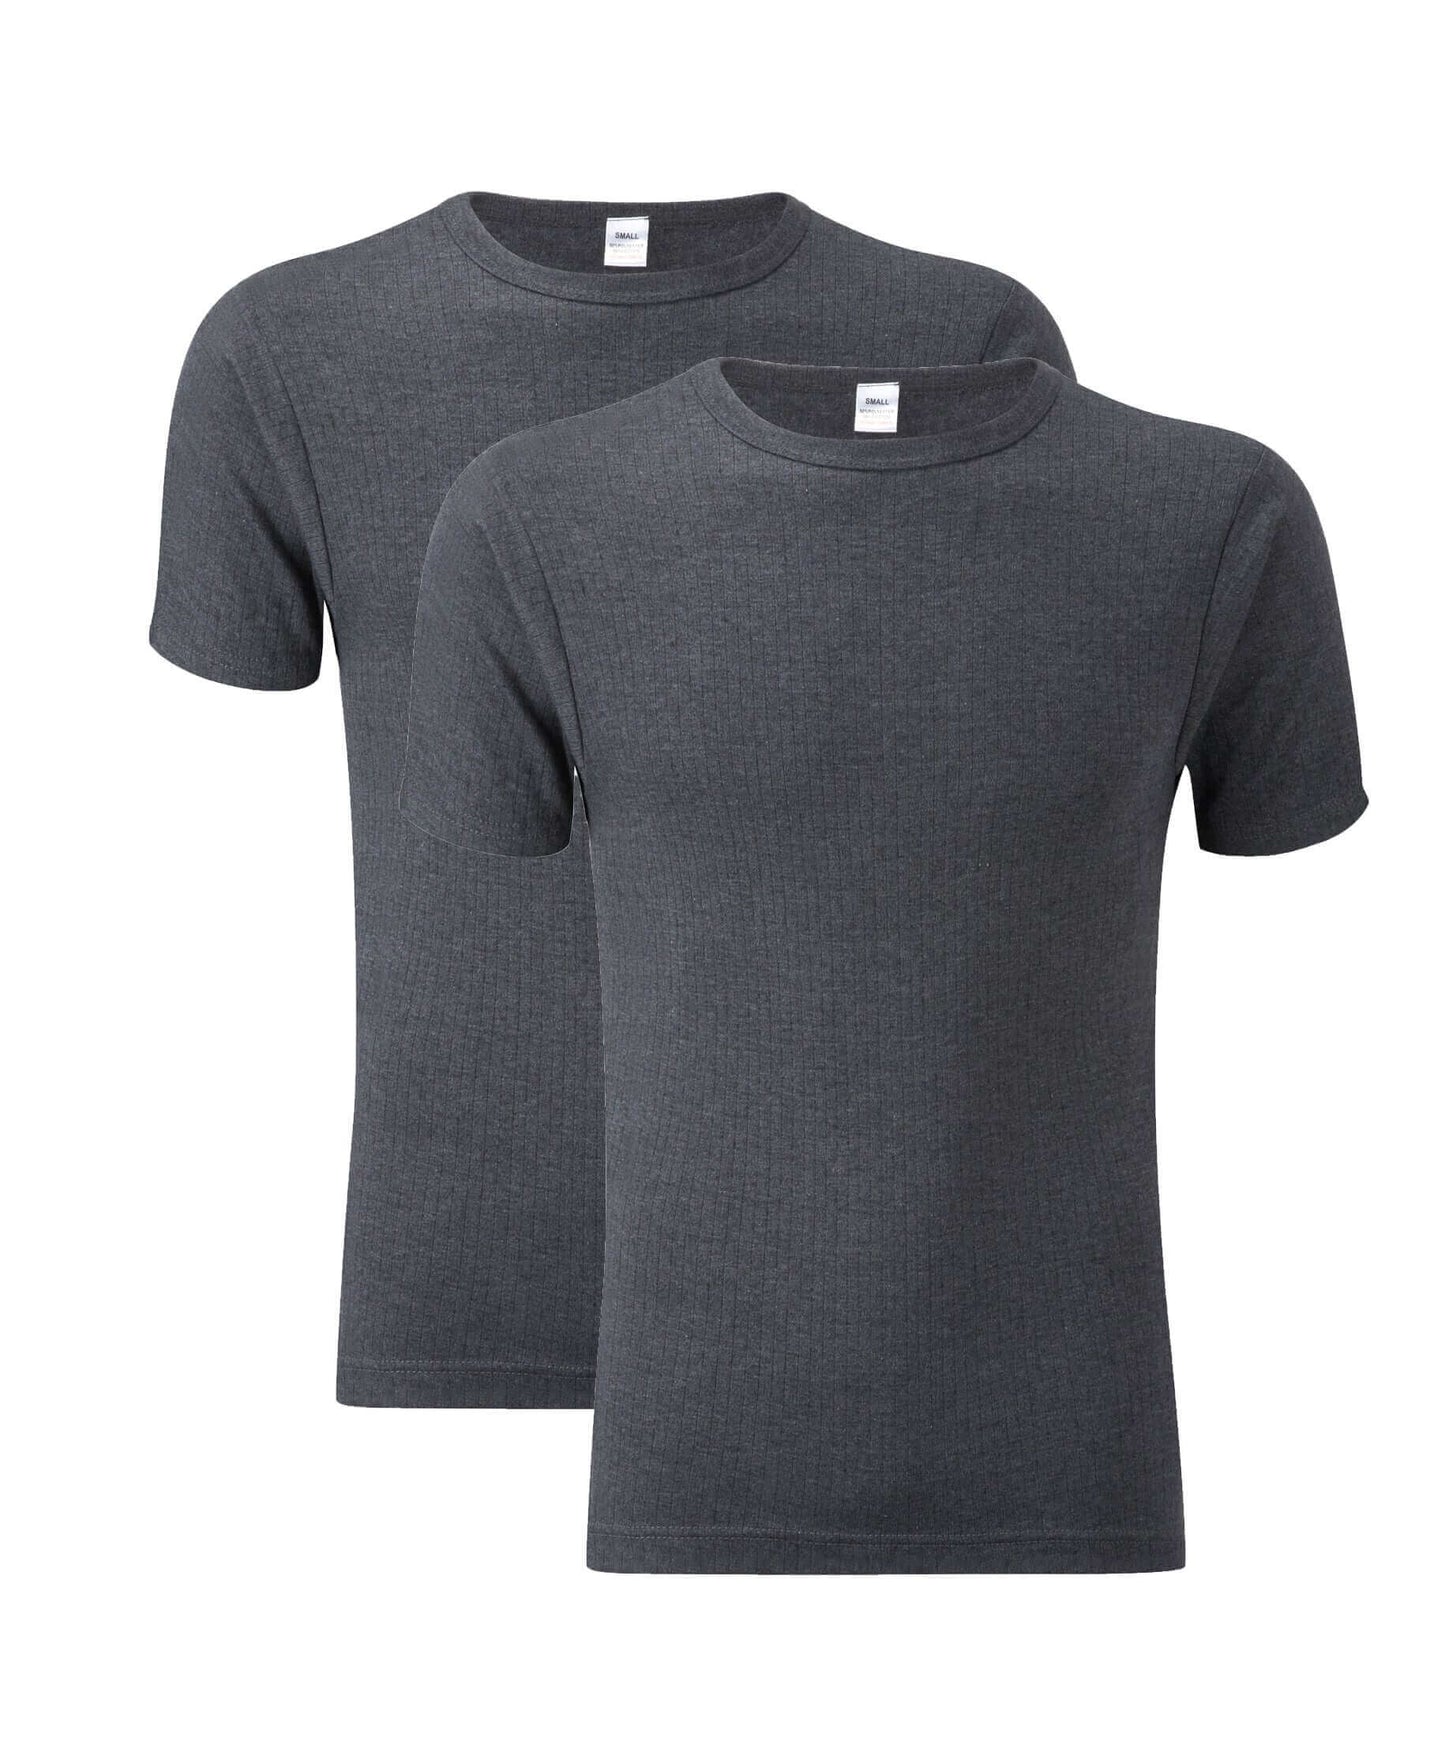 Heatwave® Pack Of 2 Men's Thermal T Shirt, Warm Underwear Baselayer. Buy now for £10.00. A Thermal Underwear by Heatwave Thermalwear. baselayer, black, blue, charcoal, grey, heatwave, hiking, large, long johns, long sleeve, marl grey, medium, mens, navy,